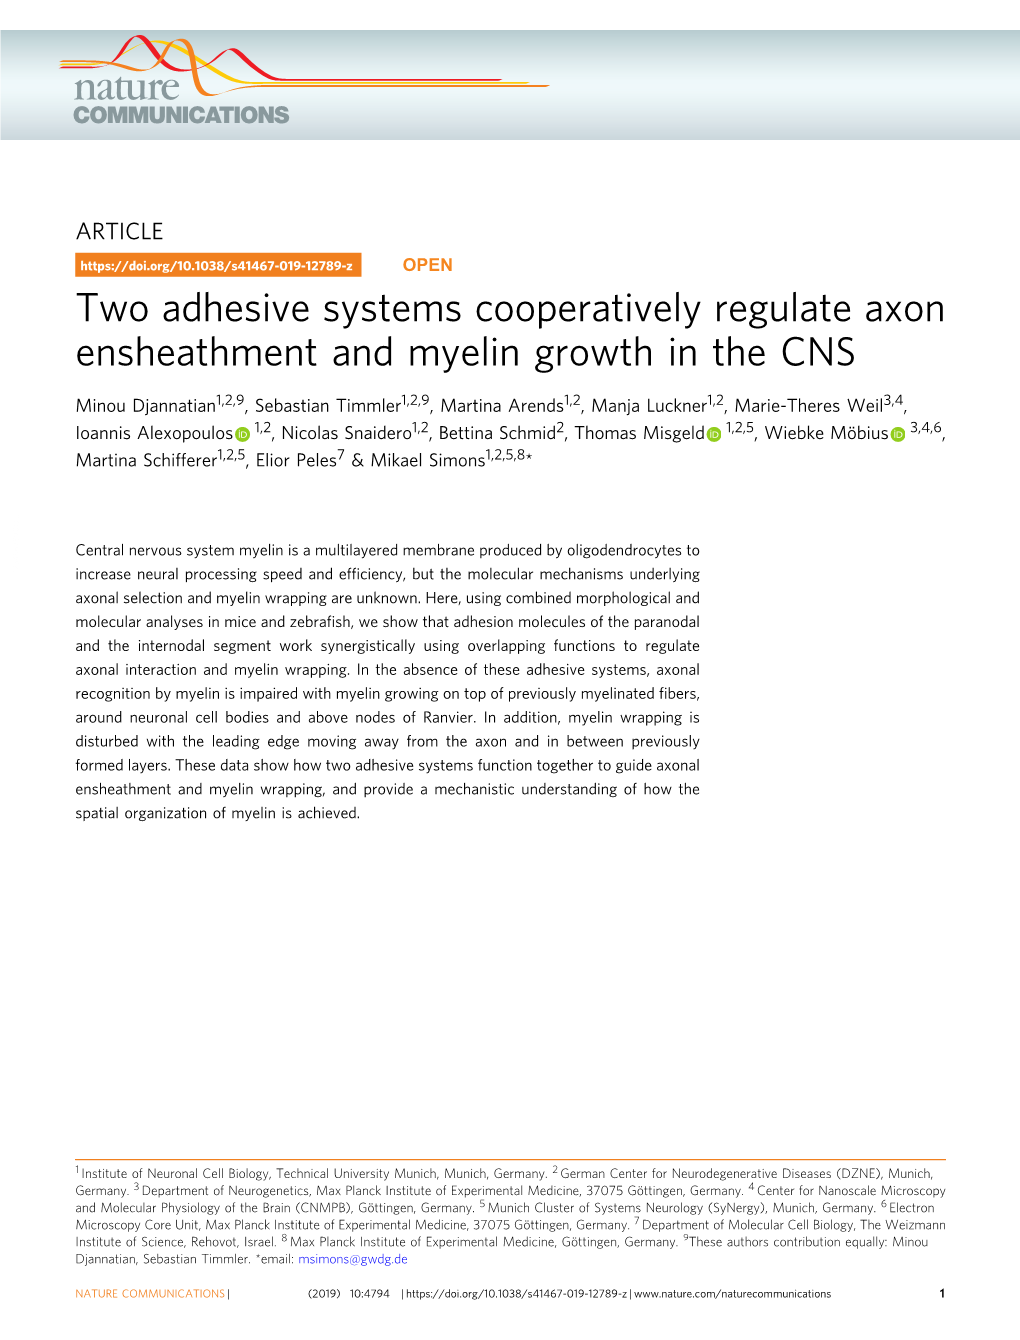 Two Adhesive Systems Cooperatively Regulate Axon Ensheathment and Myelin Growth in the CNS